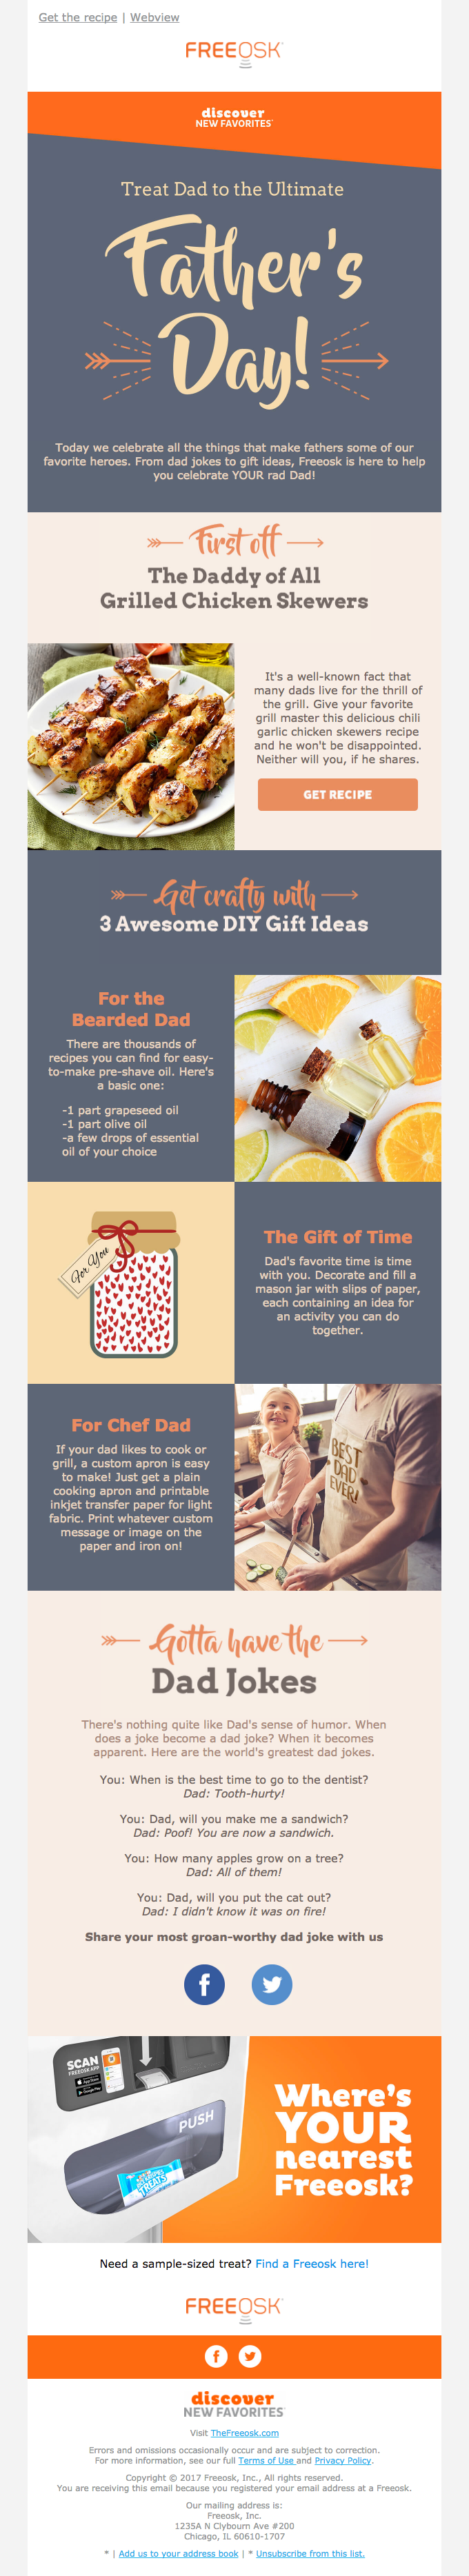 Here are the World’s Greatest Father’s Day Ideas!